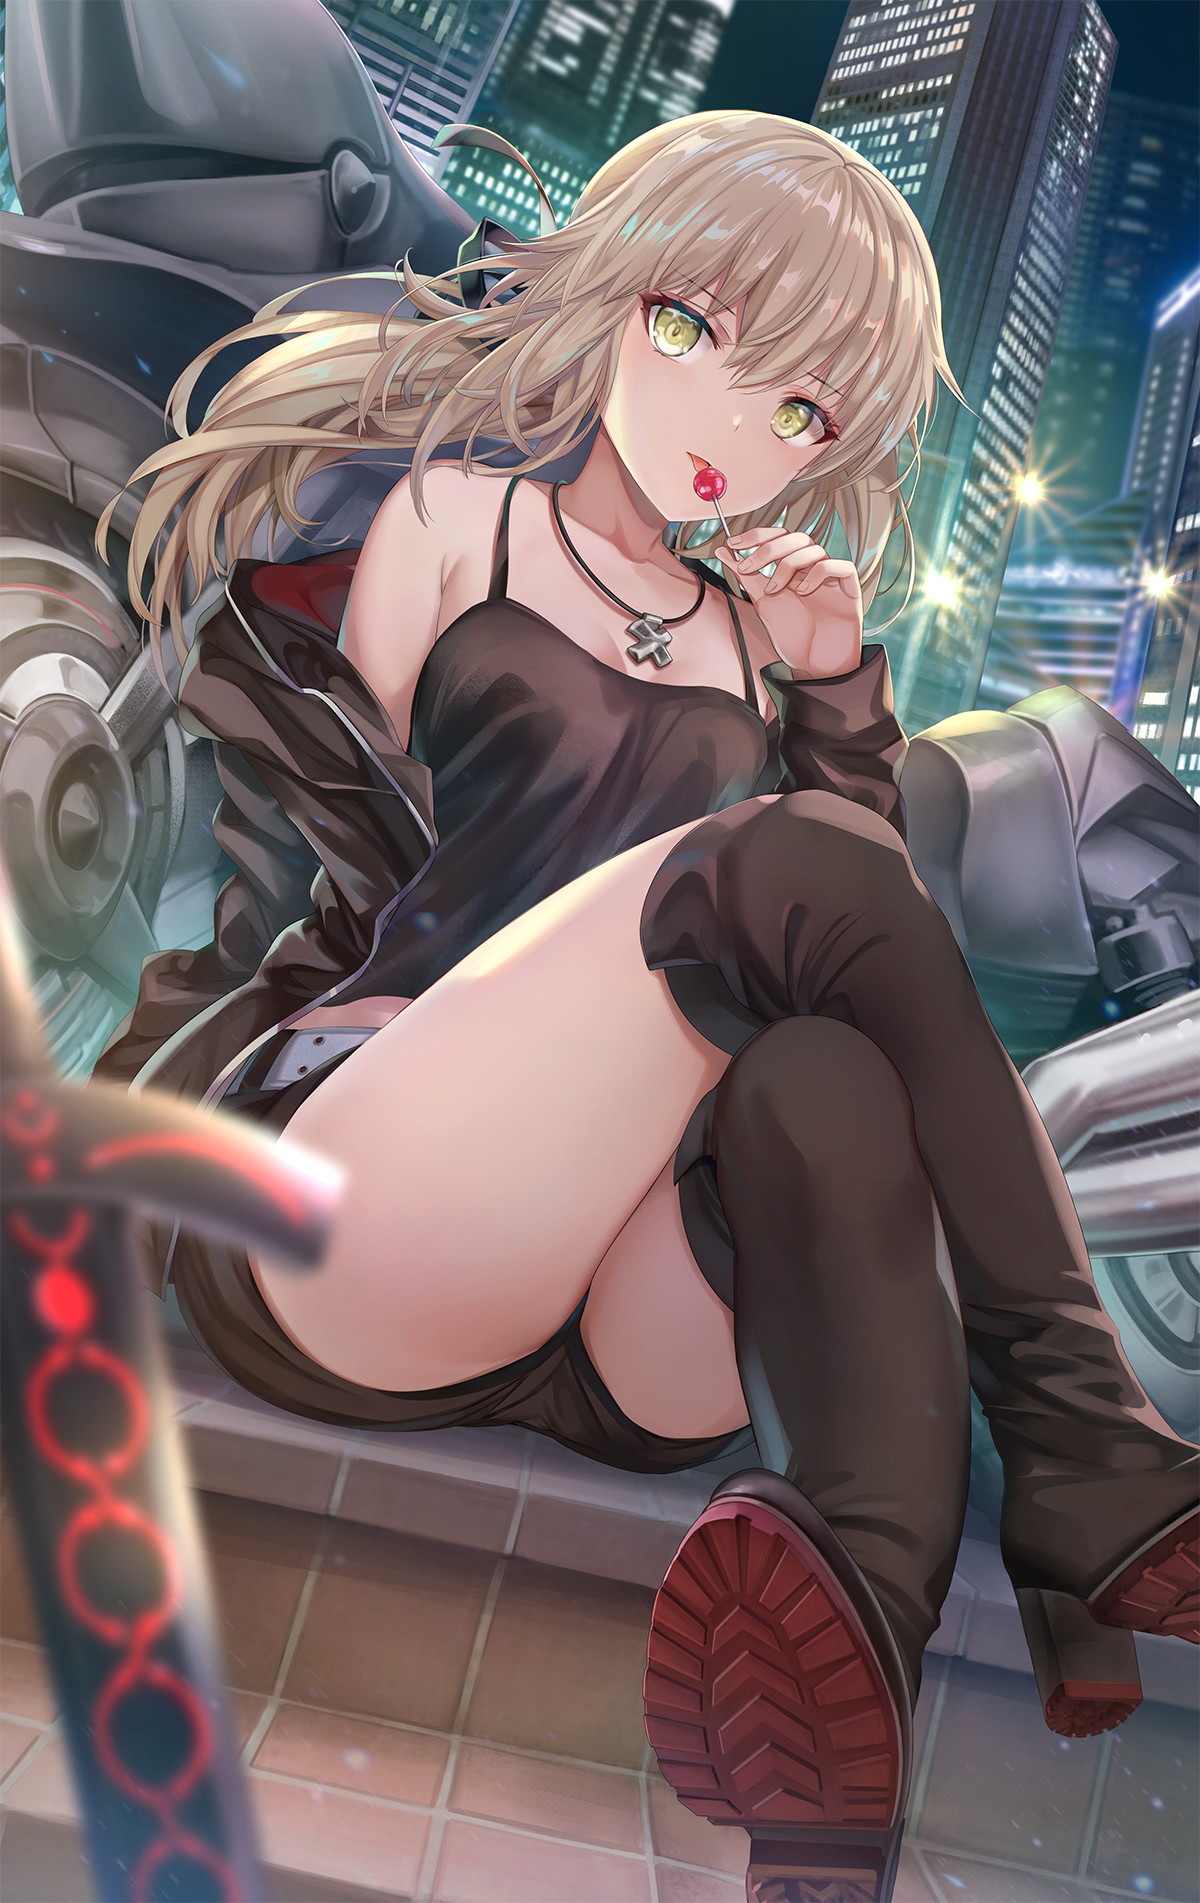 Anime 1200x1903 anime anime girls digital art artwork 2D portrait display legs crossed blonde Saber Alter Fate/Grand Order Artoria Pendragon Fate series Torino Akua thigh high boots short shorts open jacket camisole yellow eyes tongue out lollipop sword motorcycle